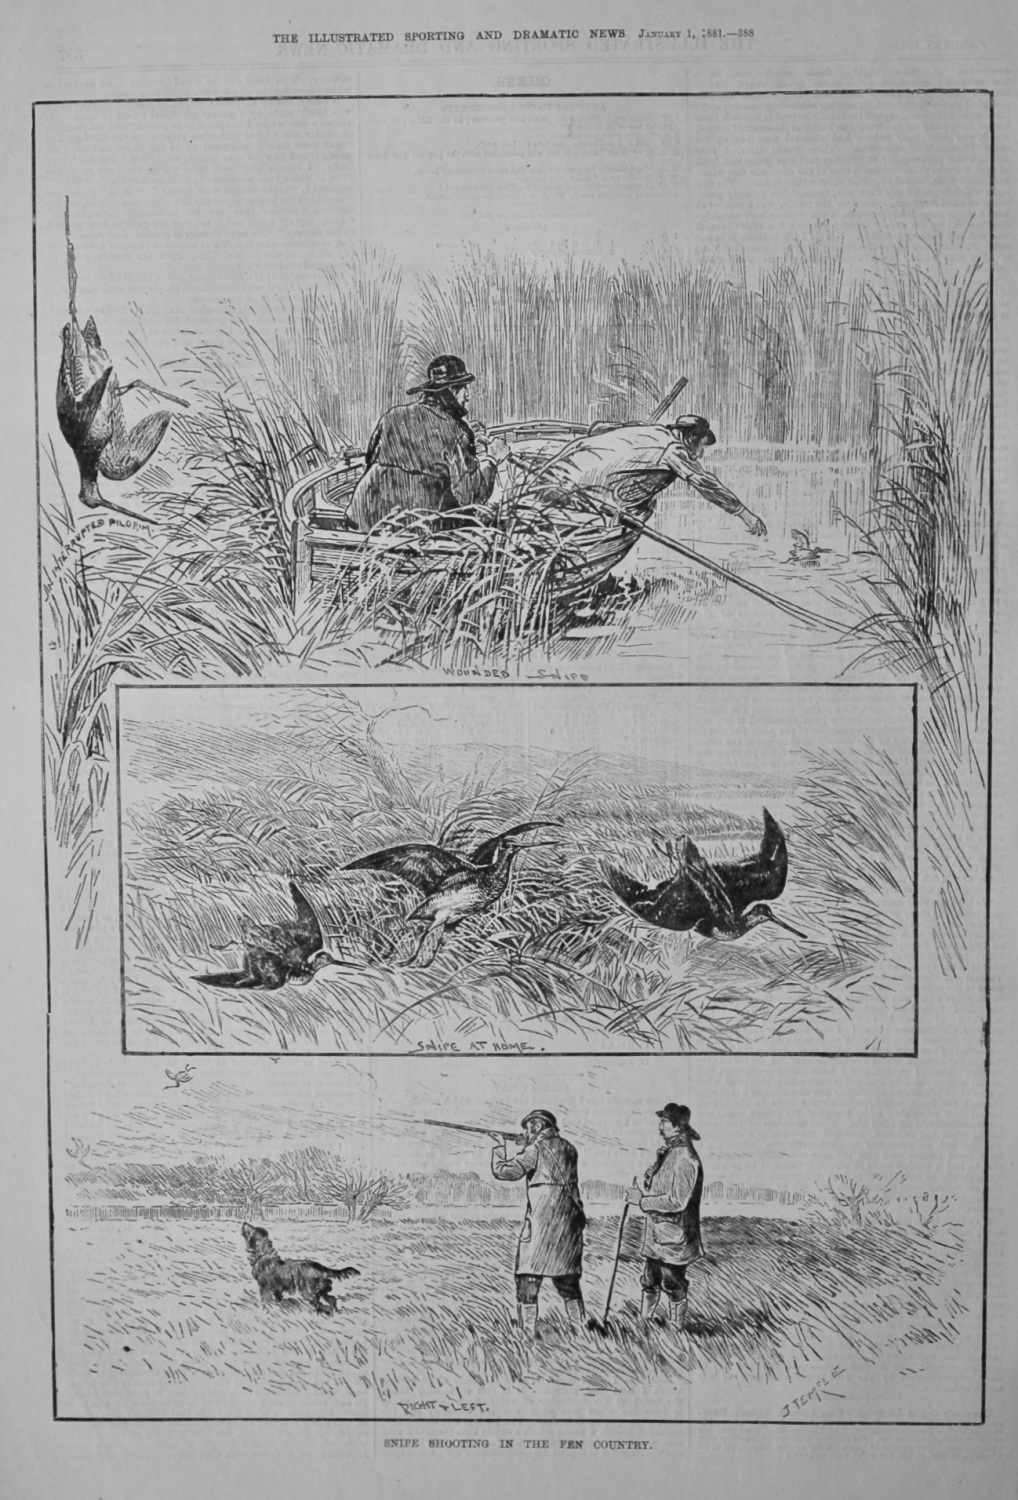 Snipe Shooting in the Fen Country.  1881.